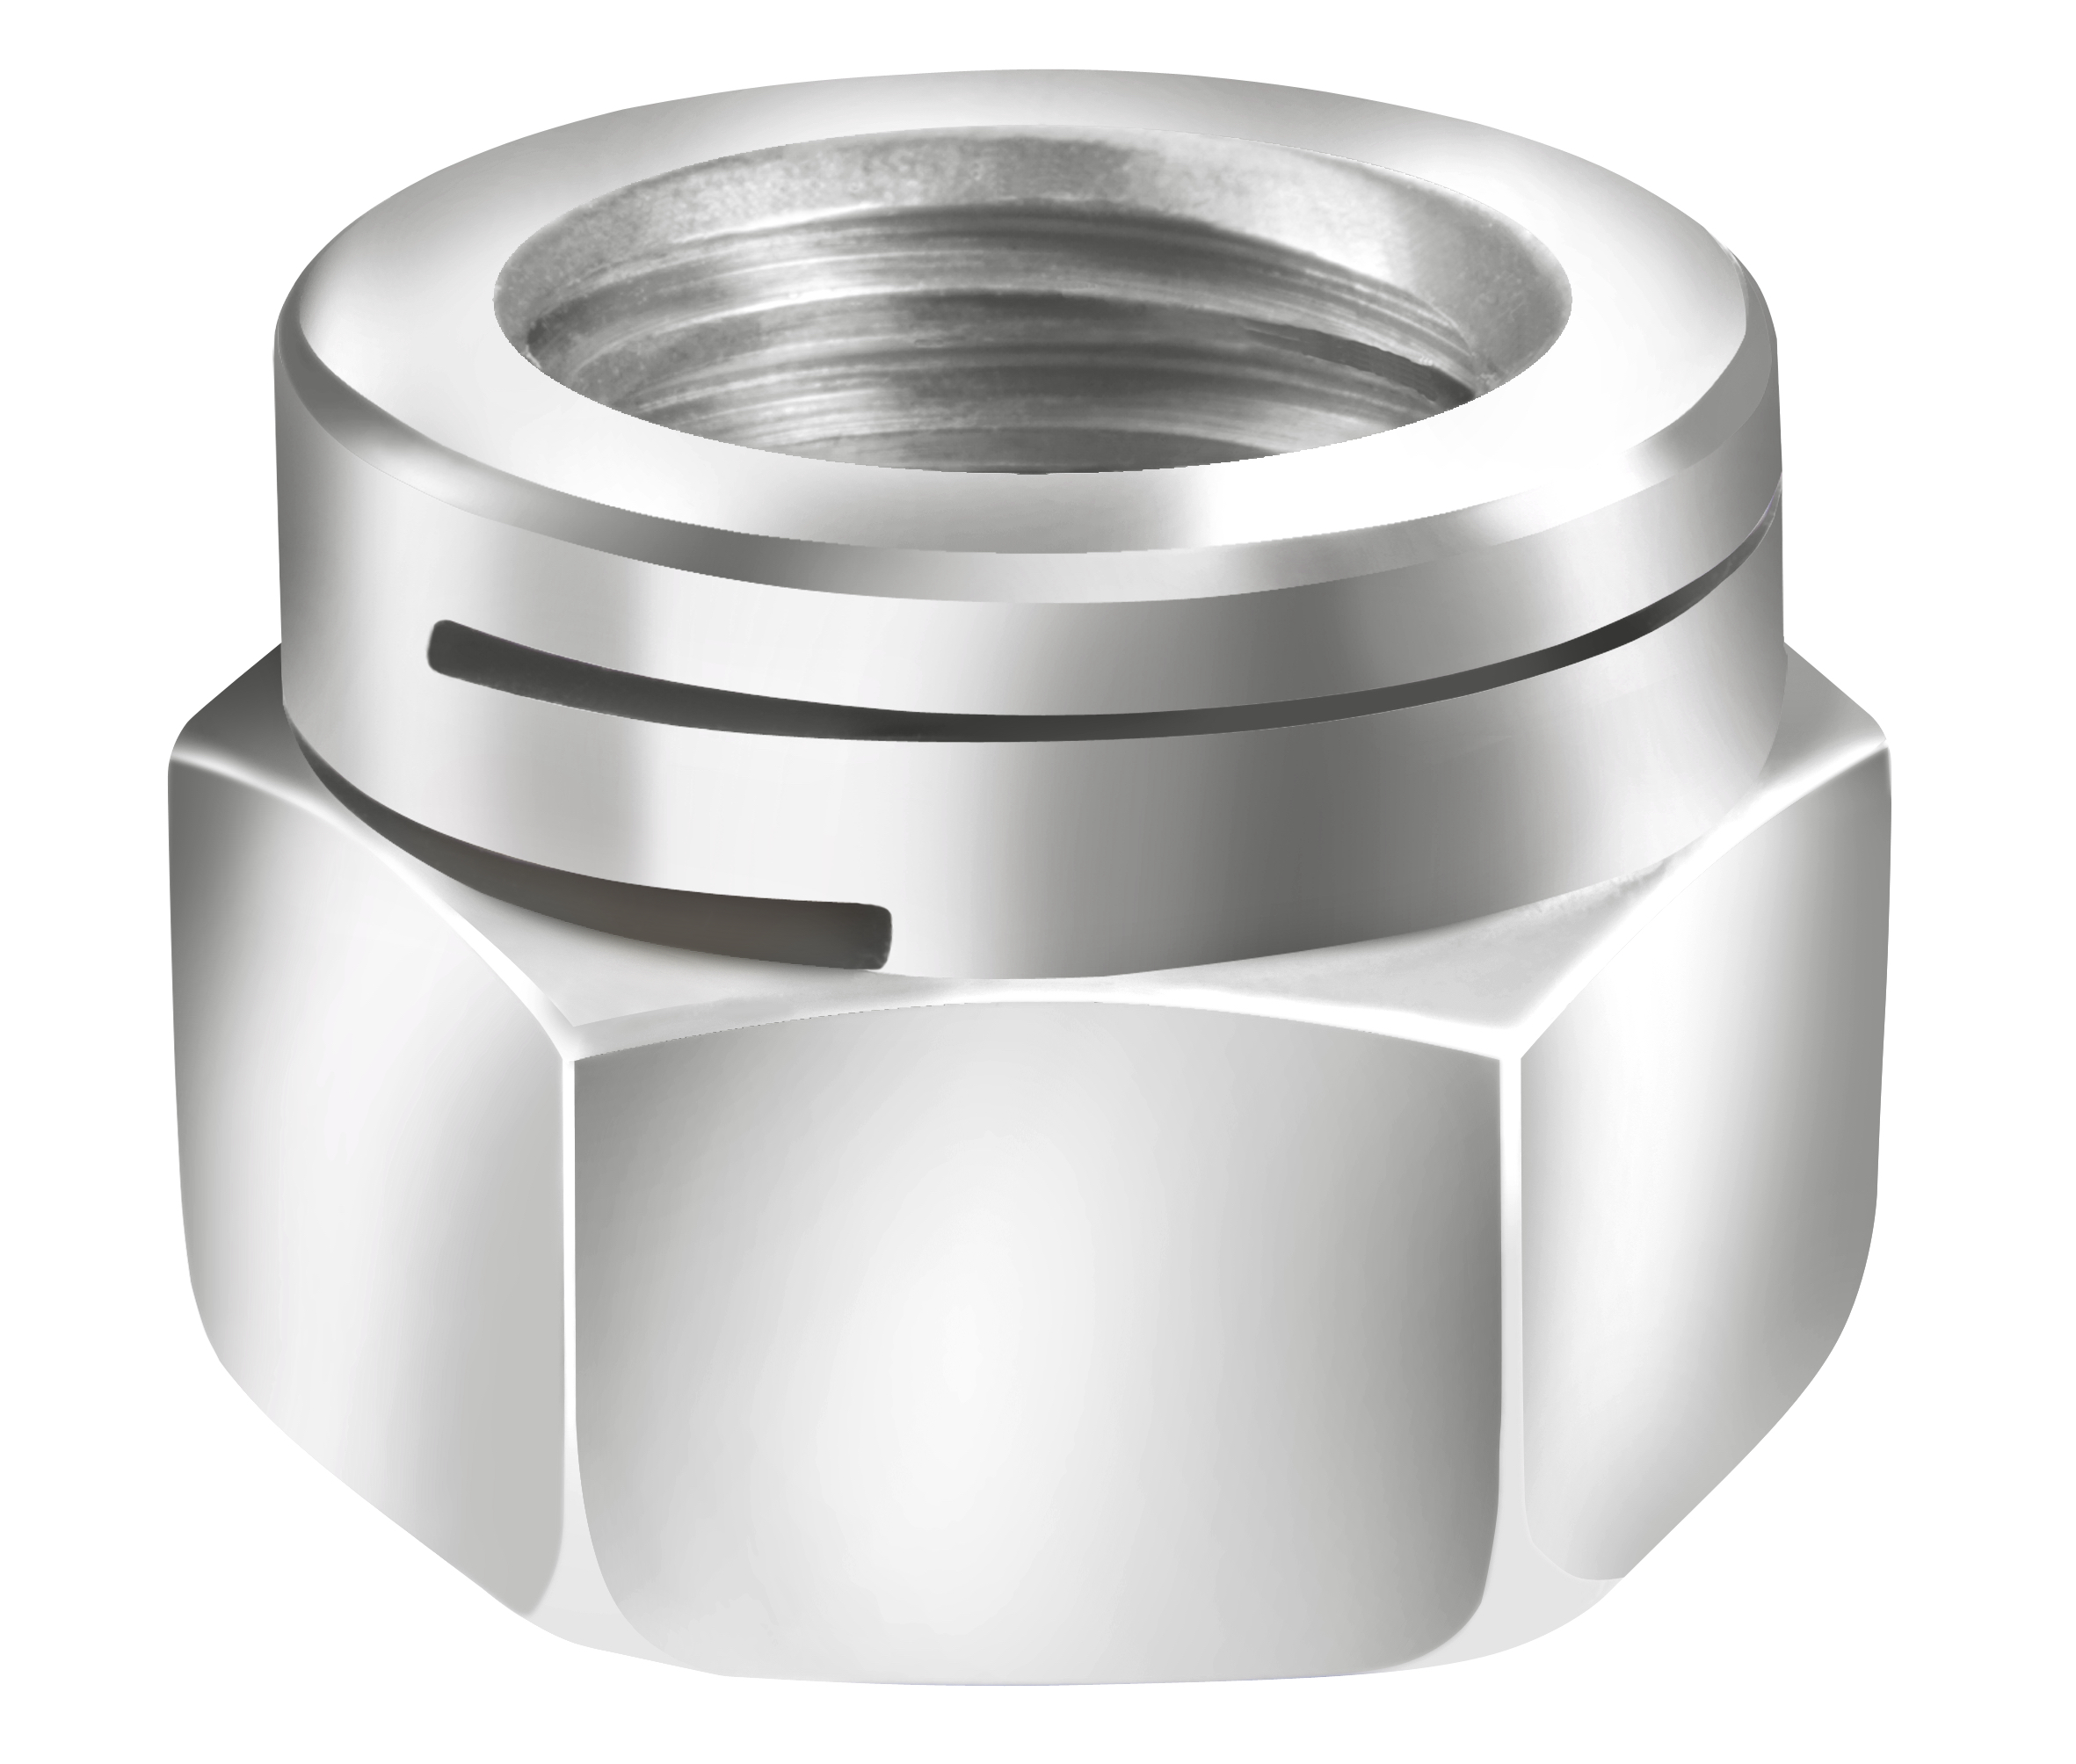 The ESL line allows better resistance to vibrations, shock & impact, extreme temperatures and corrosion. ESL nuts are reusable and ensure assembly and disassembly without loosening or seizing up